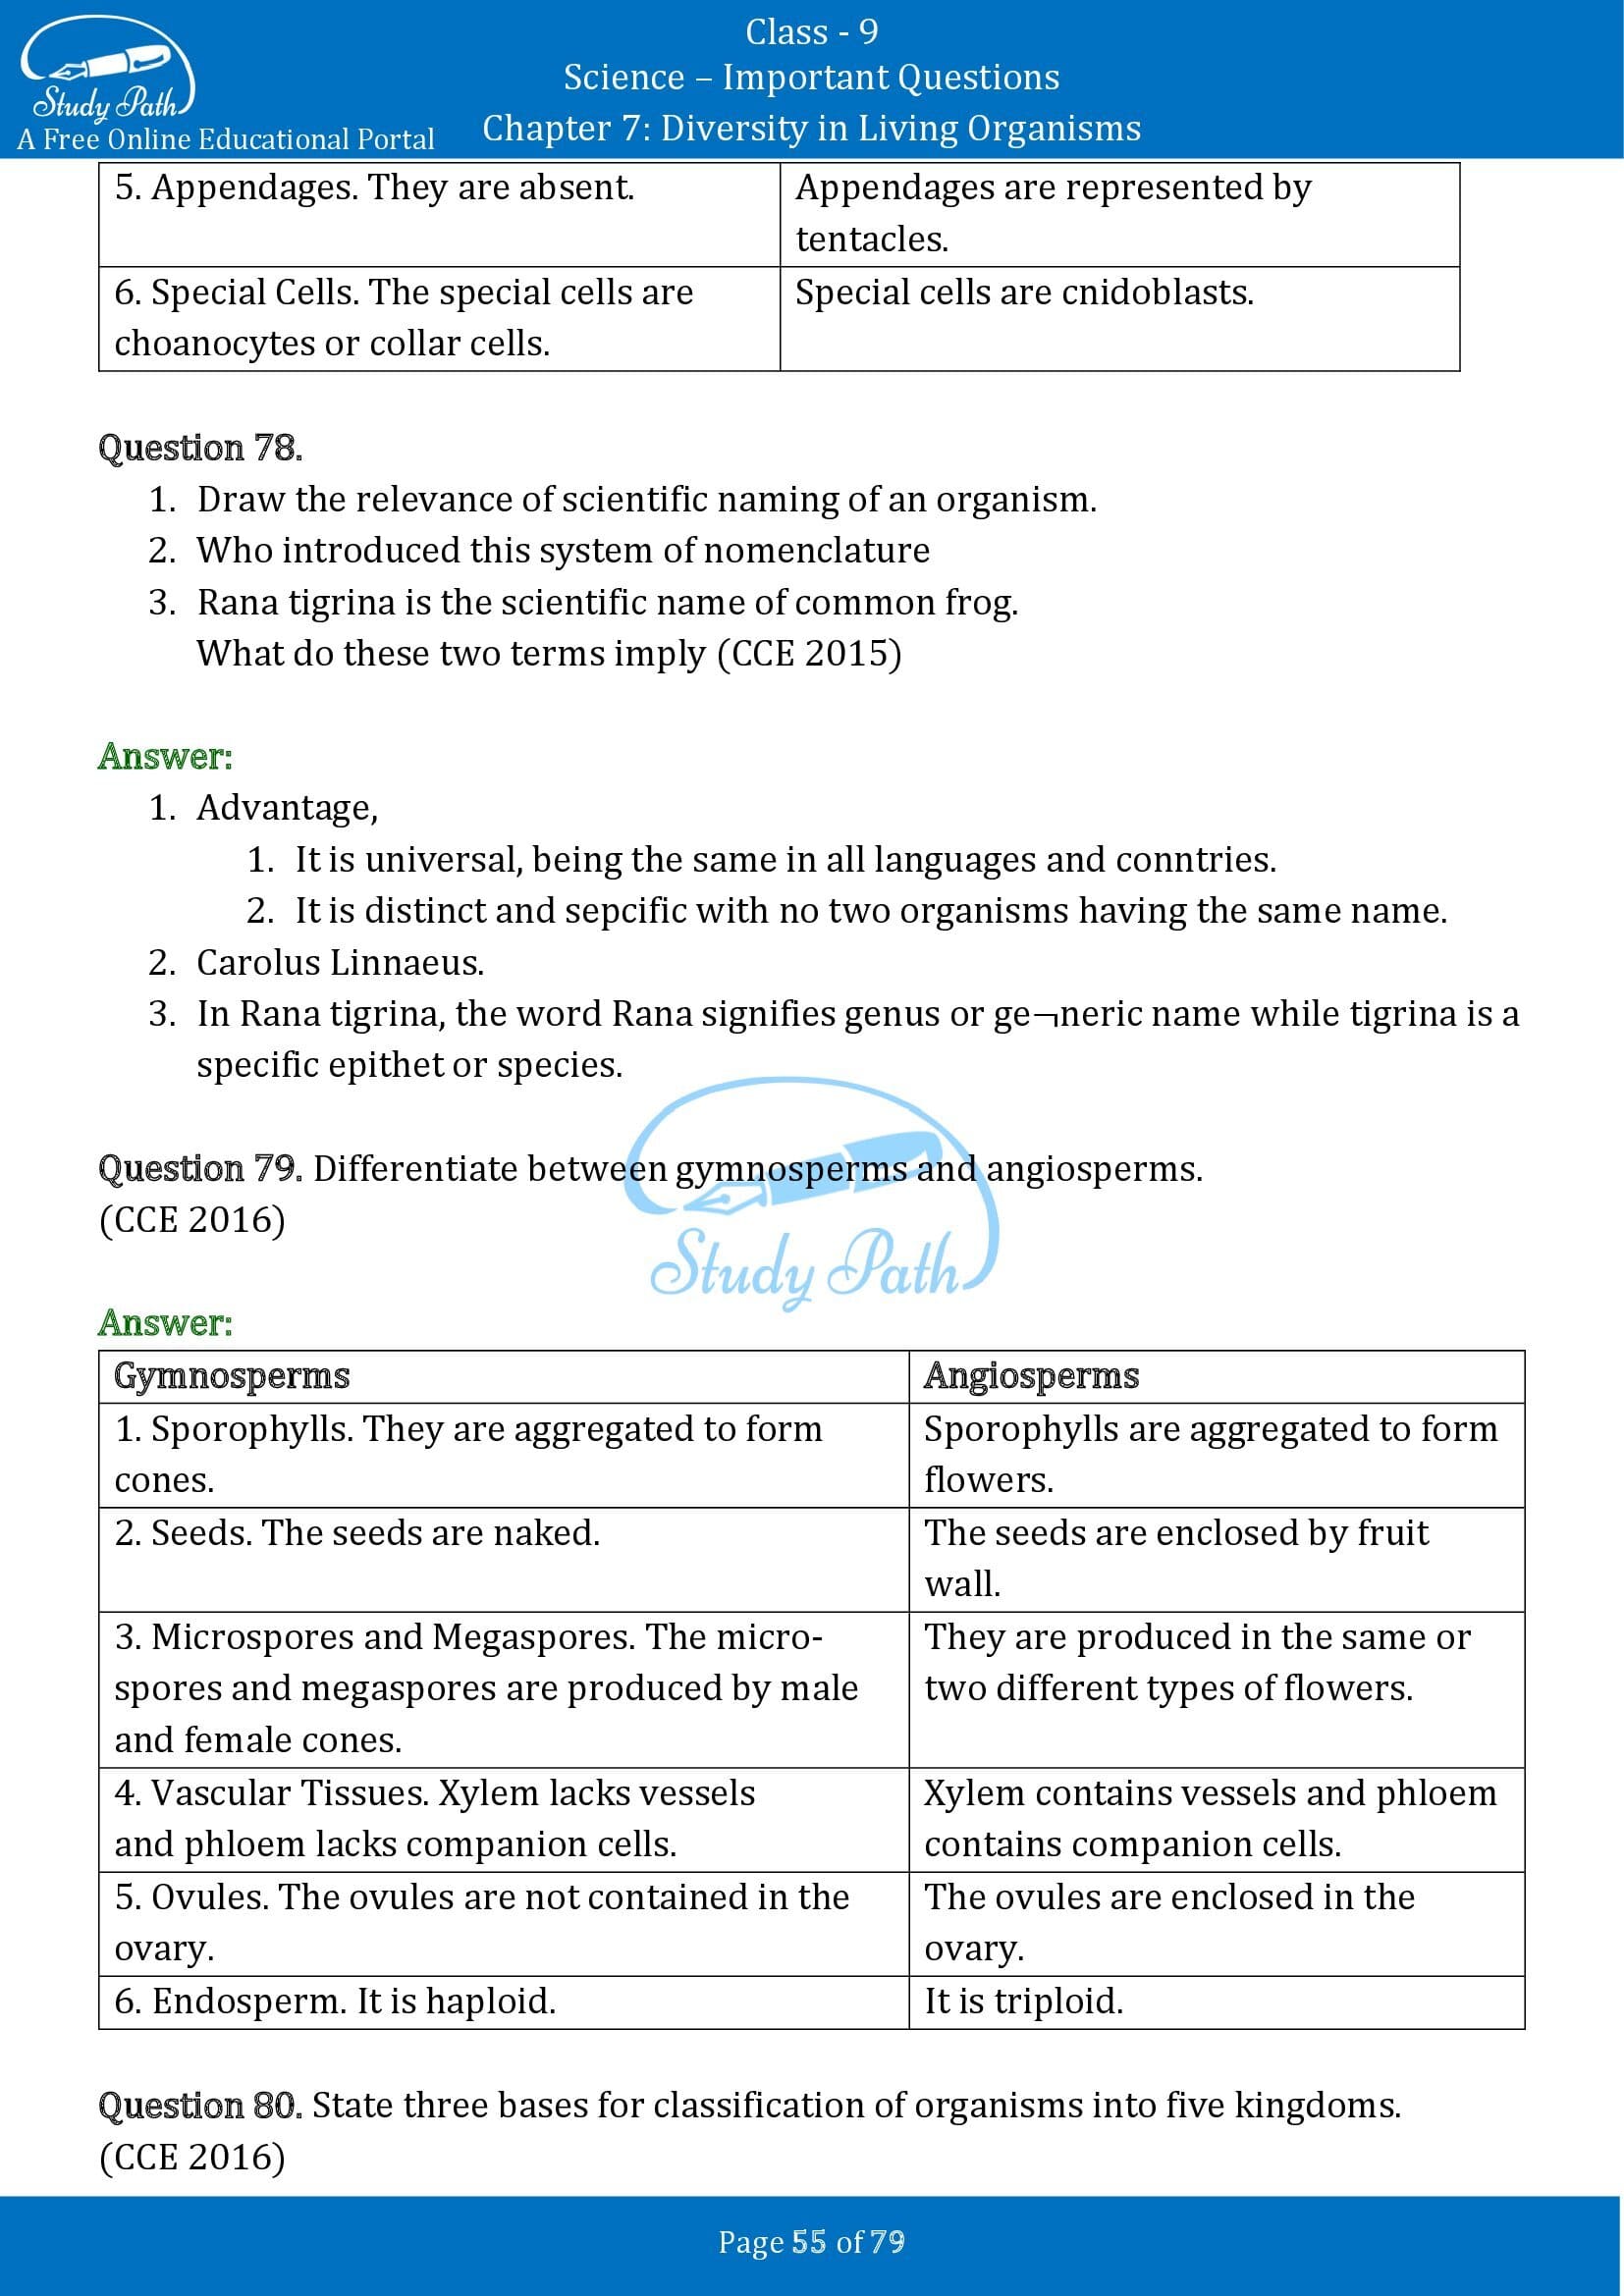 Important Questions for Class 9 Science Chapter 7 Diversity in Living Organisms 00055